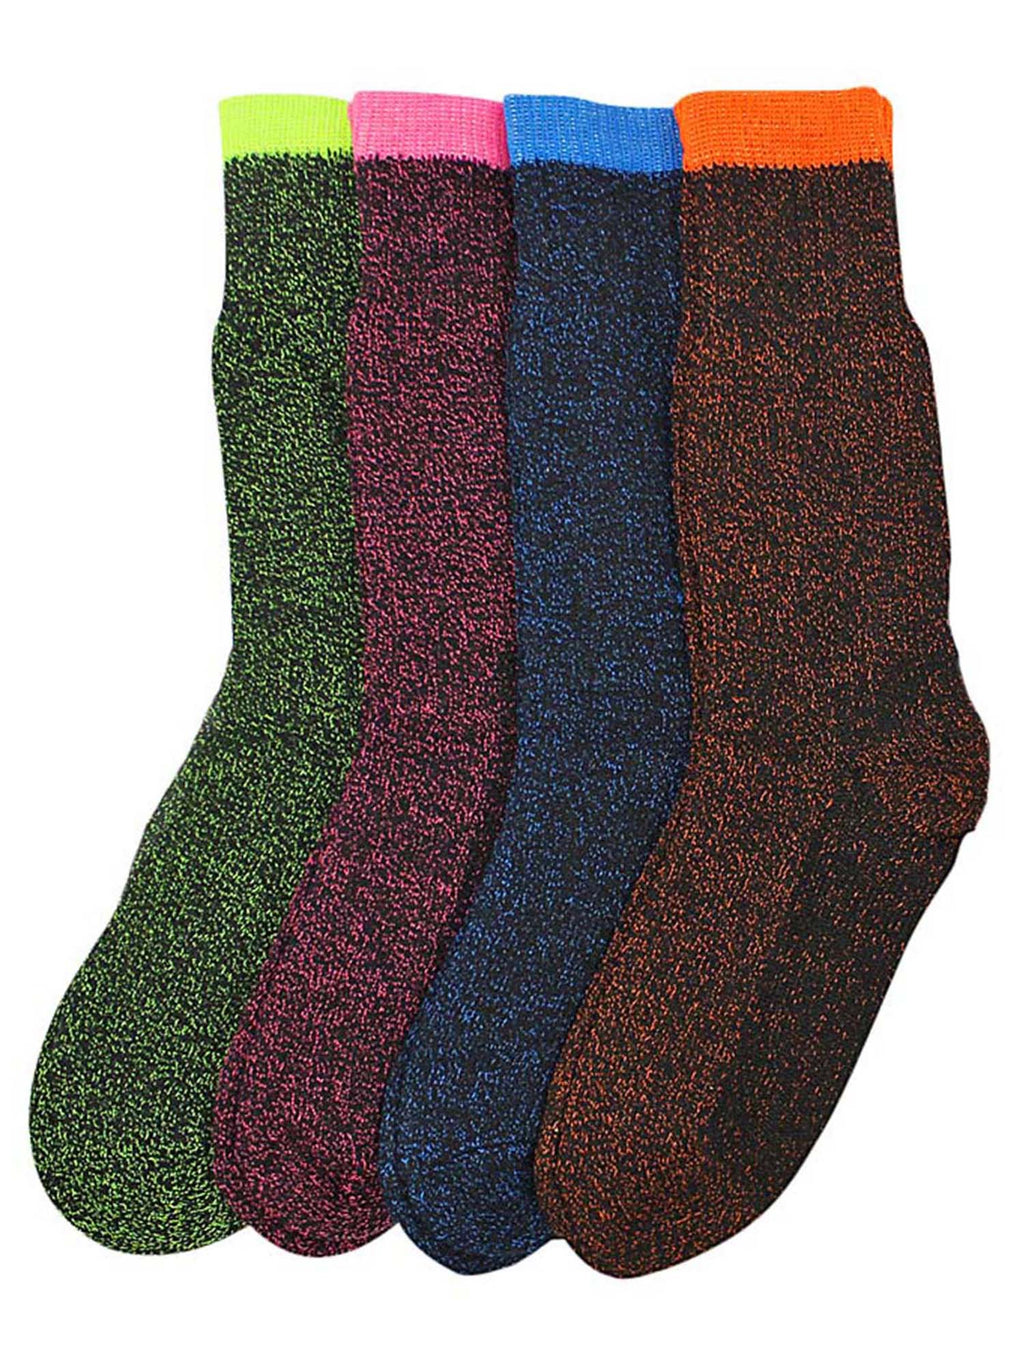 Colorful Warm Thermal Heated 4 Pack Womens Socks